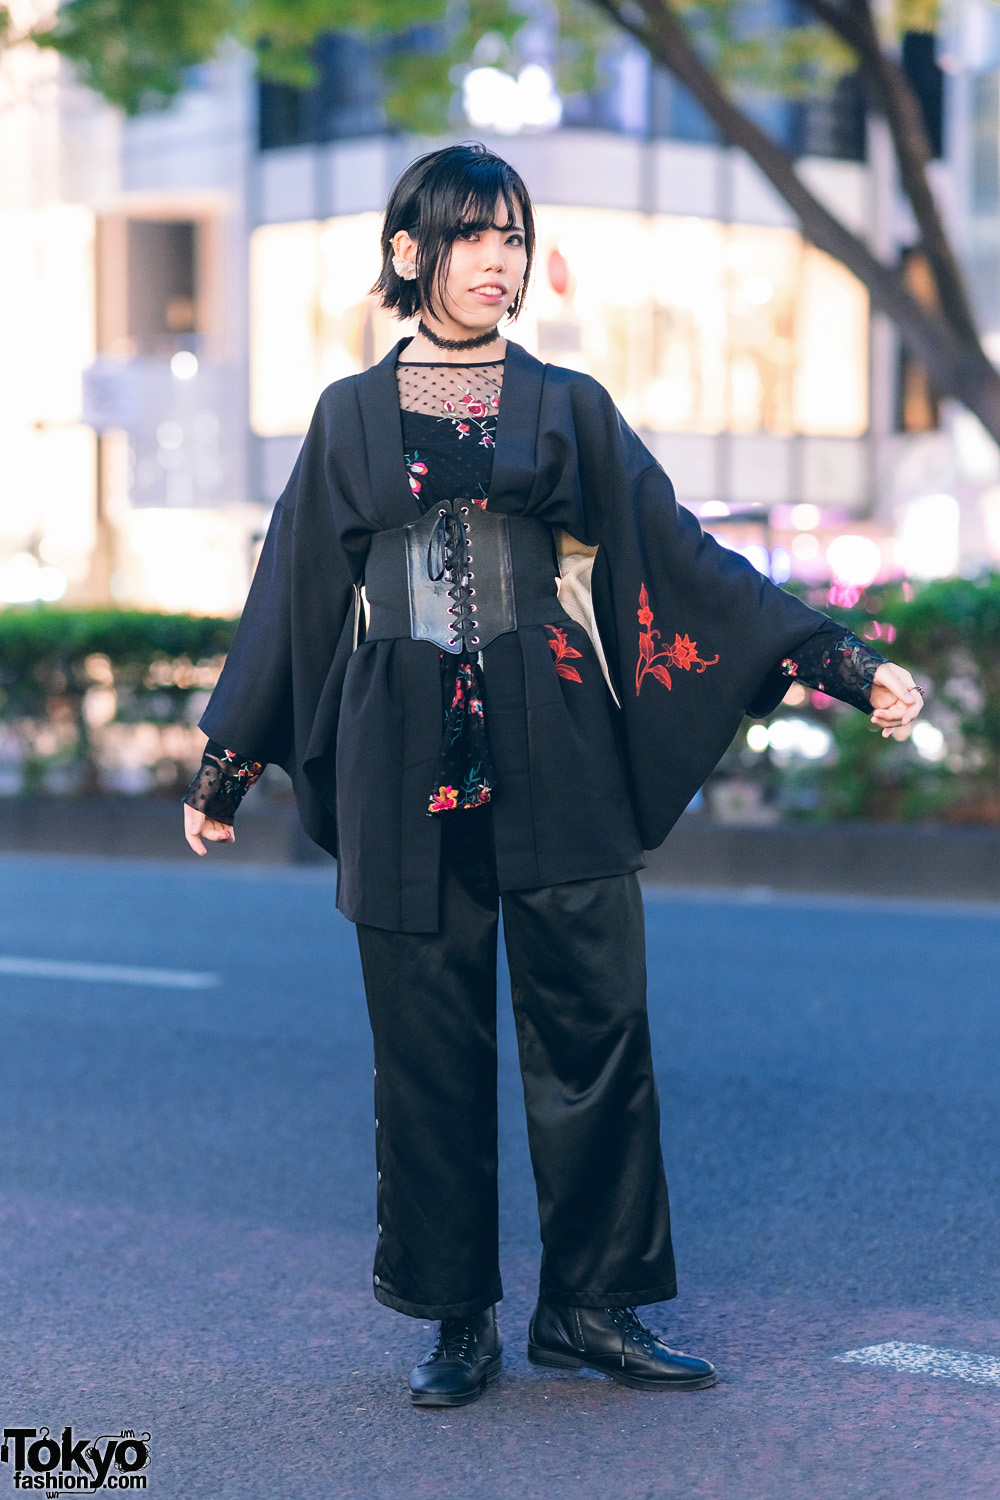 Vintage Kimono & Corset Japanese Street Style w/ Fringed Bob, Colored Contacts, Ruffle Earring, Tattoo Choker & Lace-Up Boots